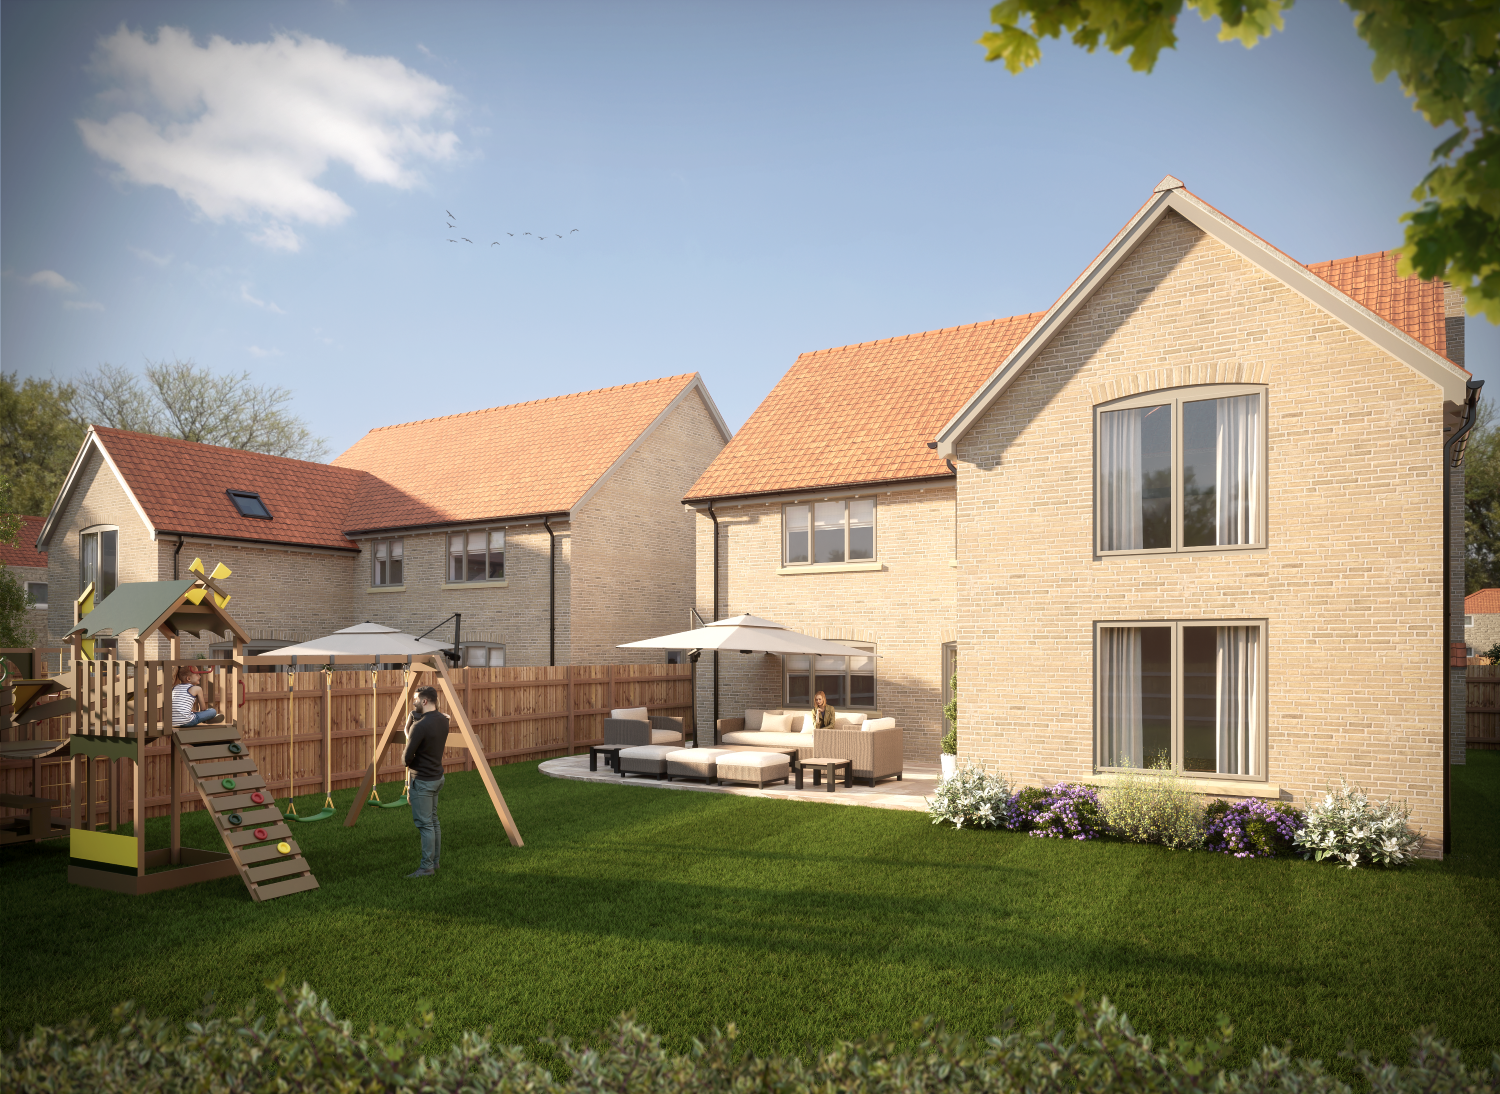 Each new home is designed to have a spacious plot with generous gardens and off road parking.